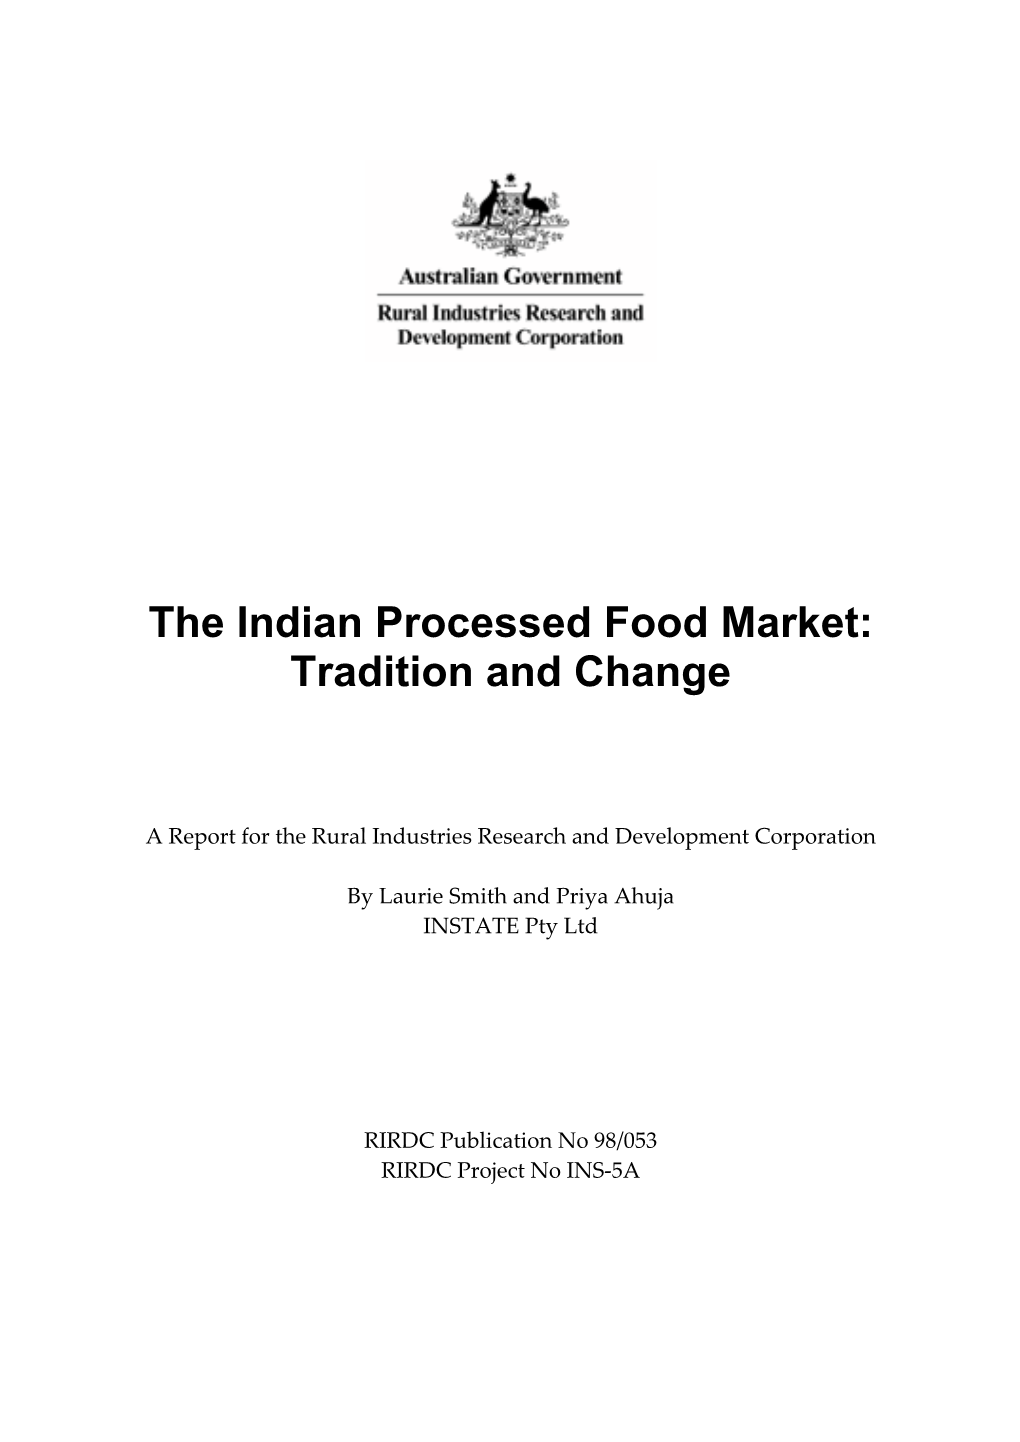 The Indian Processed Food Market: Tradition and Change